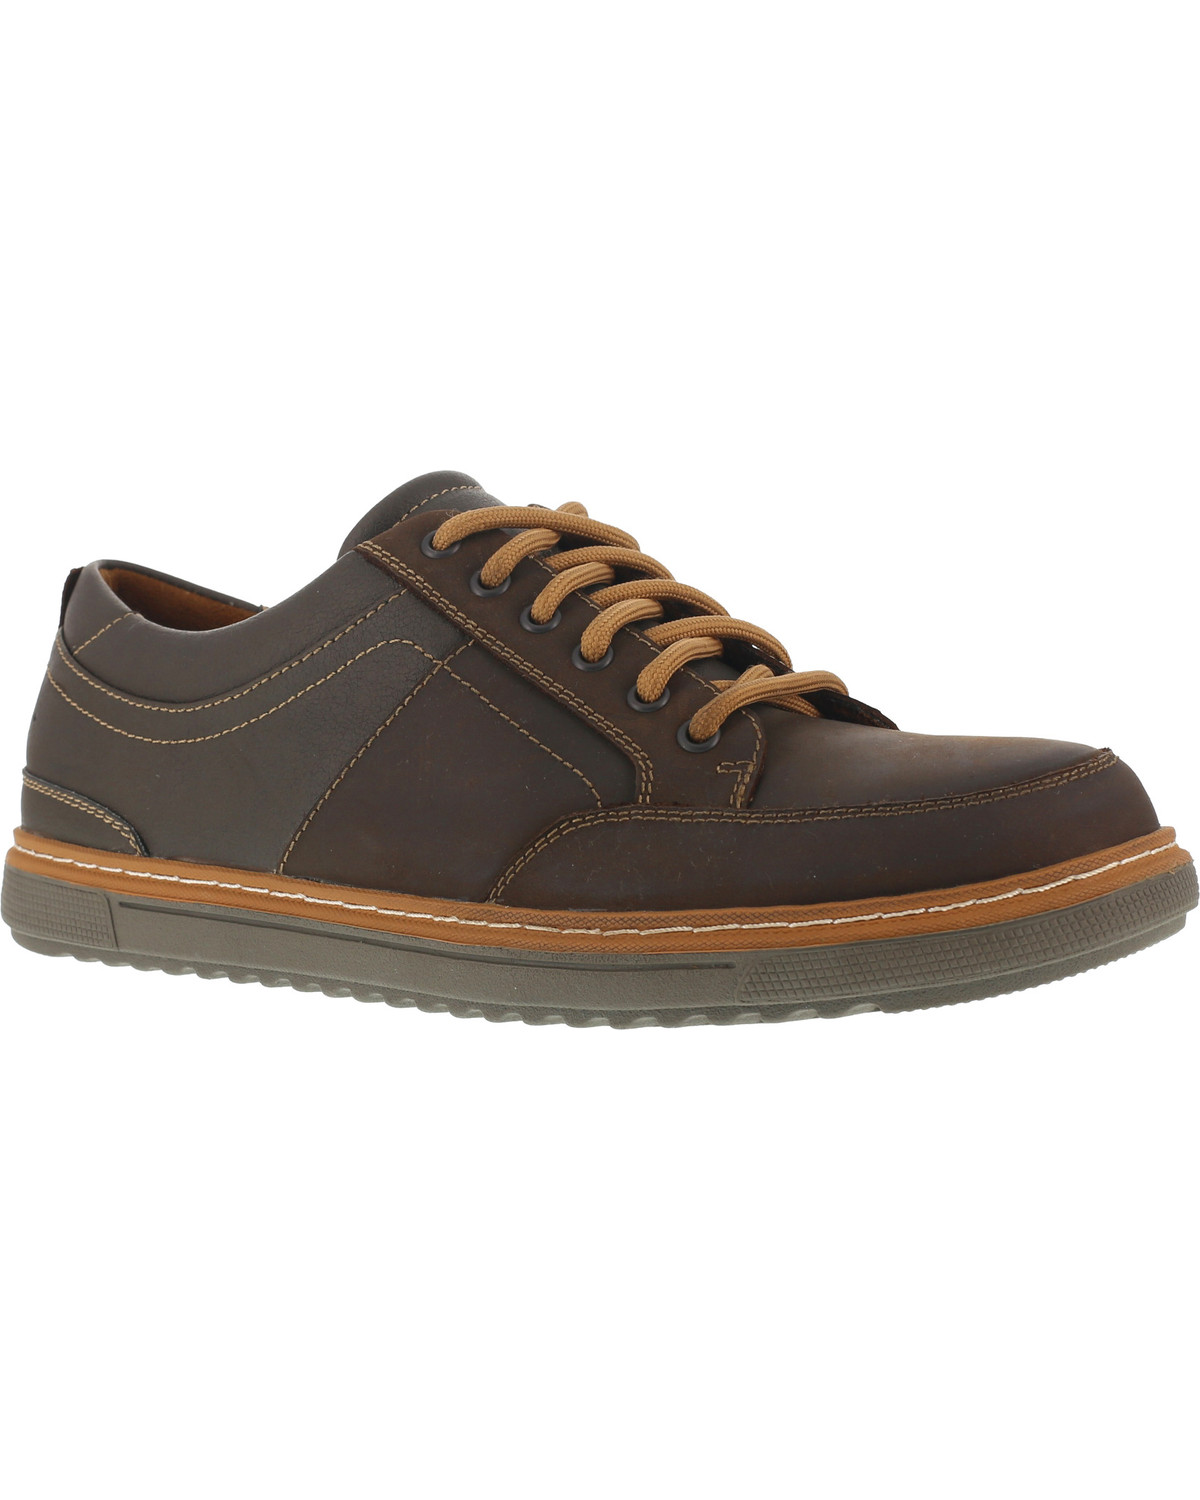 Gridley Casual Oxford Shoes - Steel Toe 